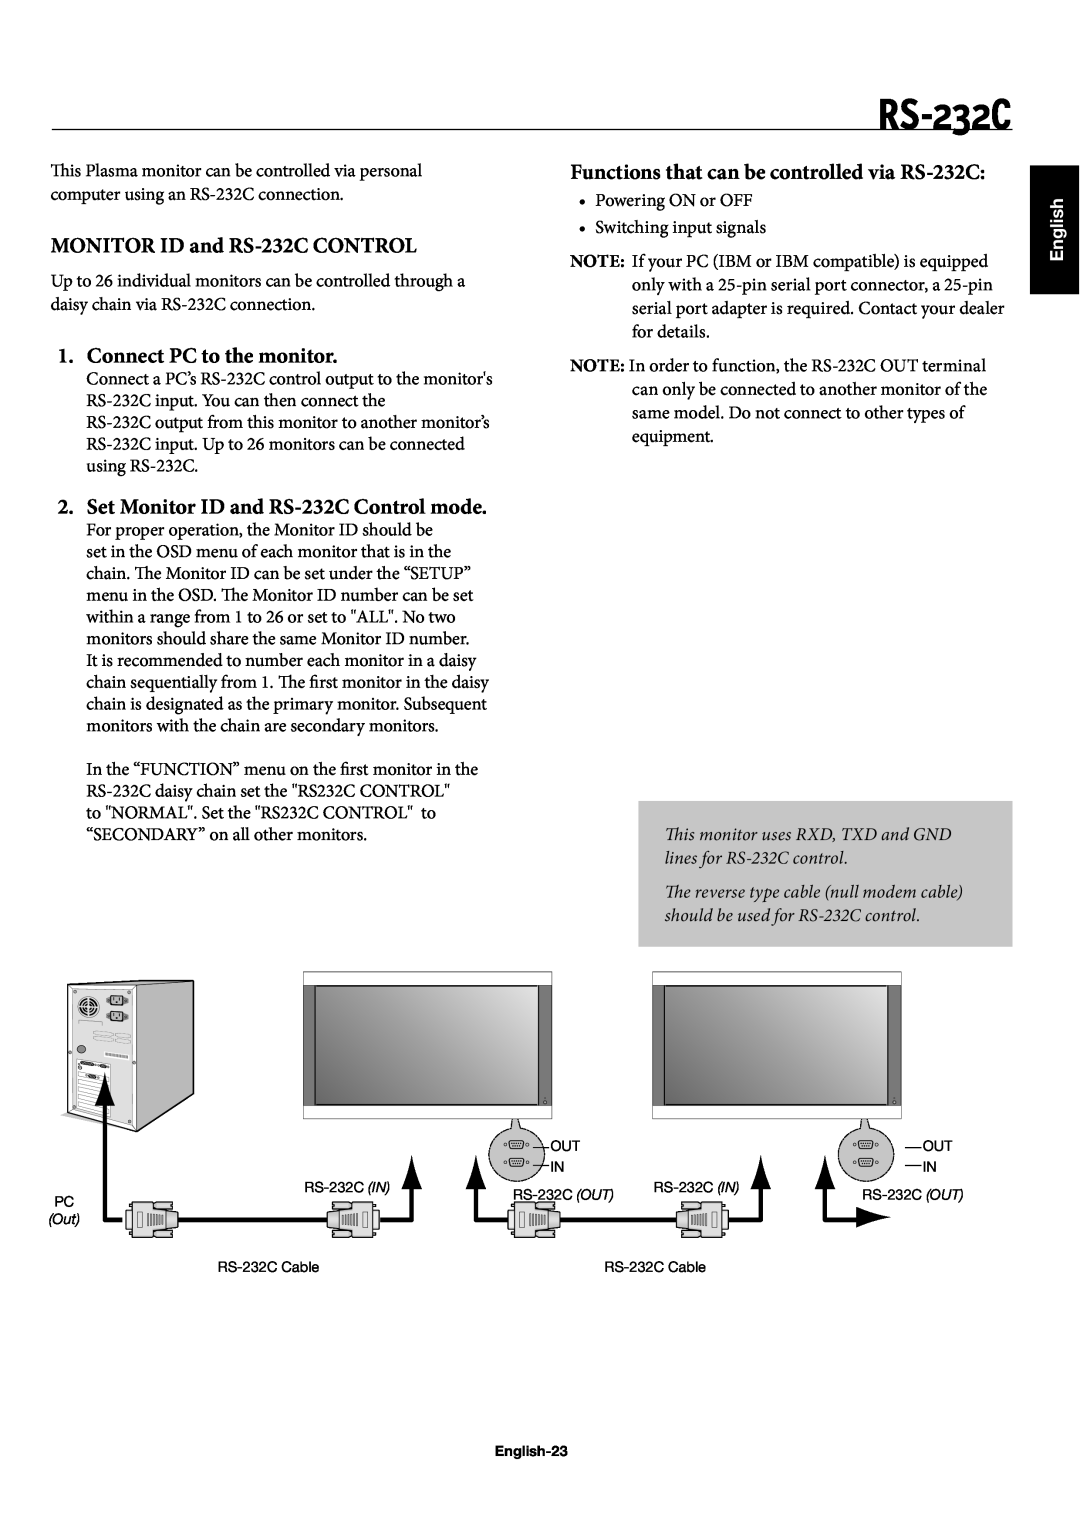 NEC 42XC10 MONITOR ID and RS-232C CONTROL, Functions that can be controlled via RS-232C, Connect PC to the monitor 